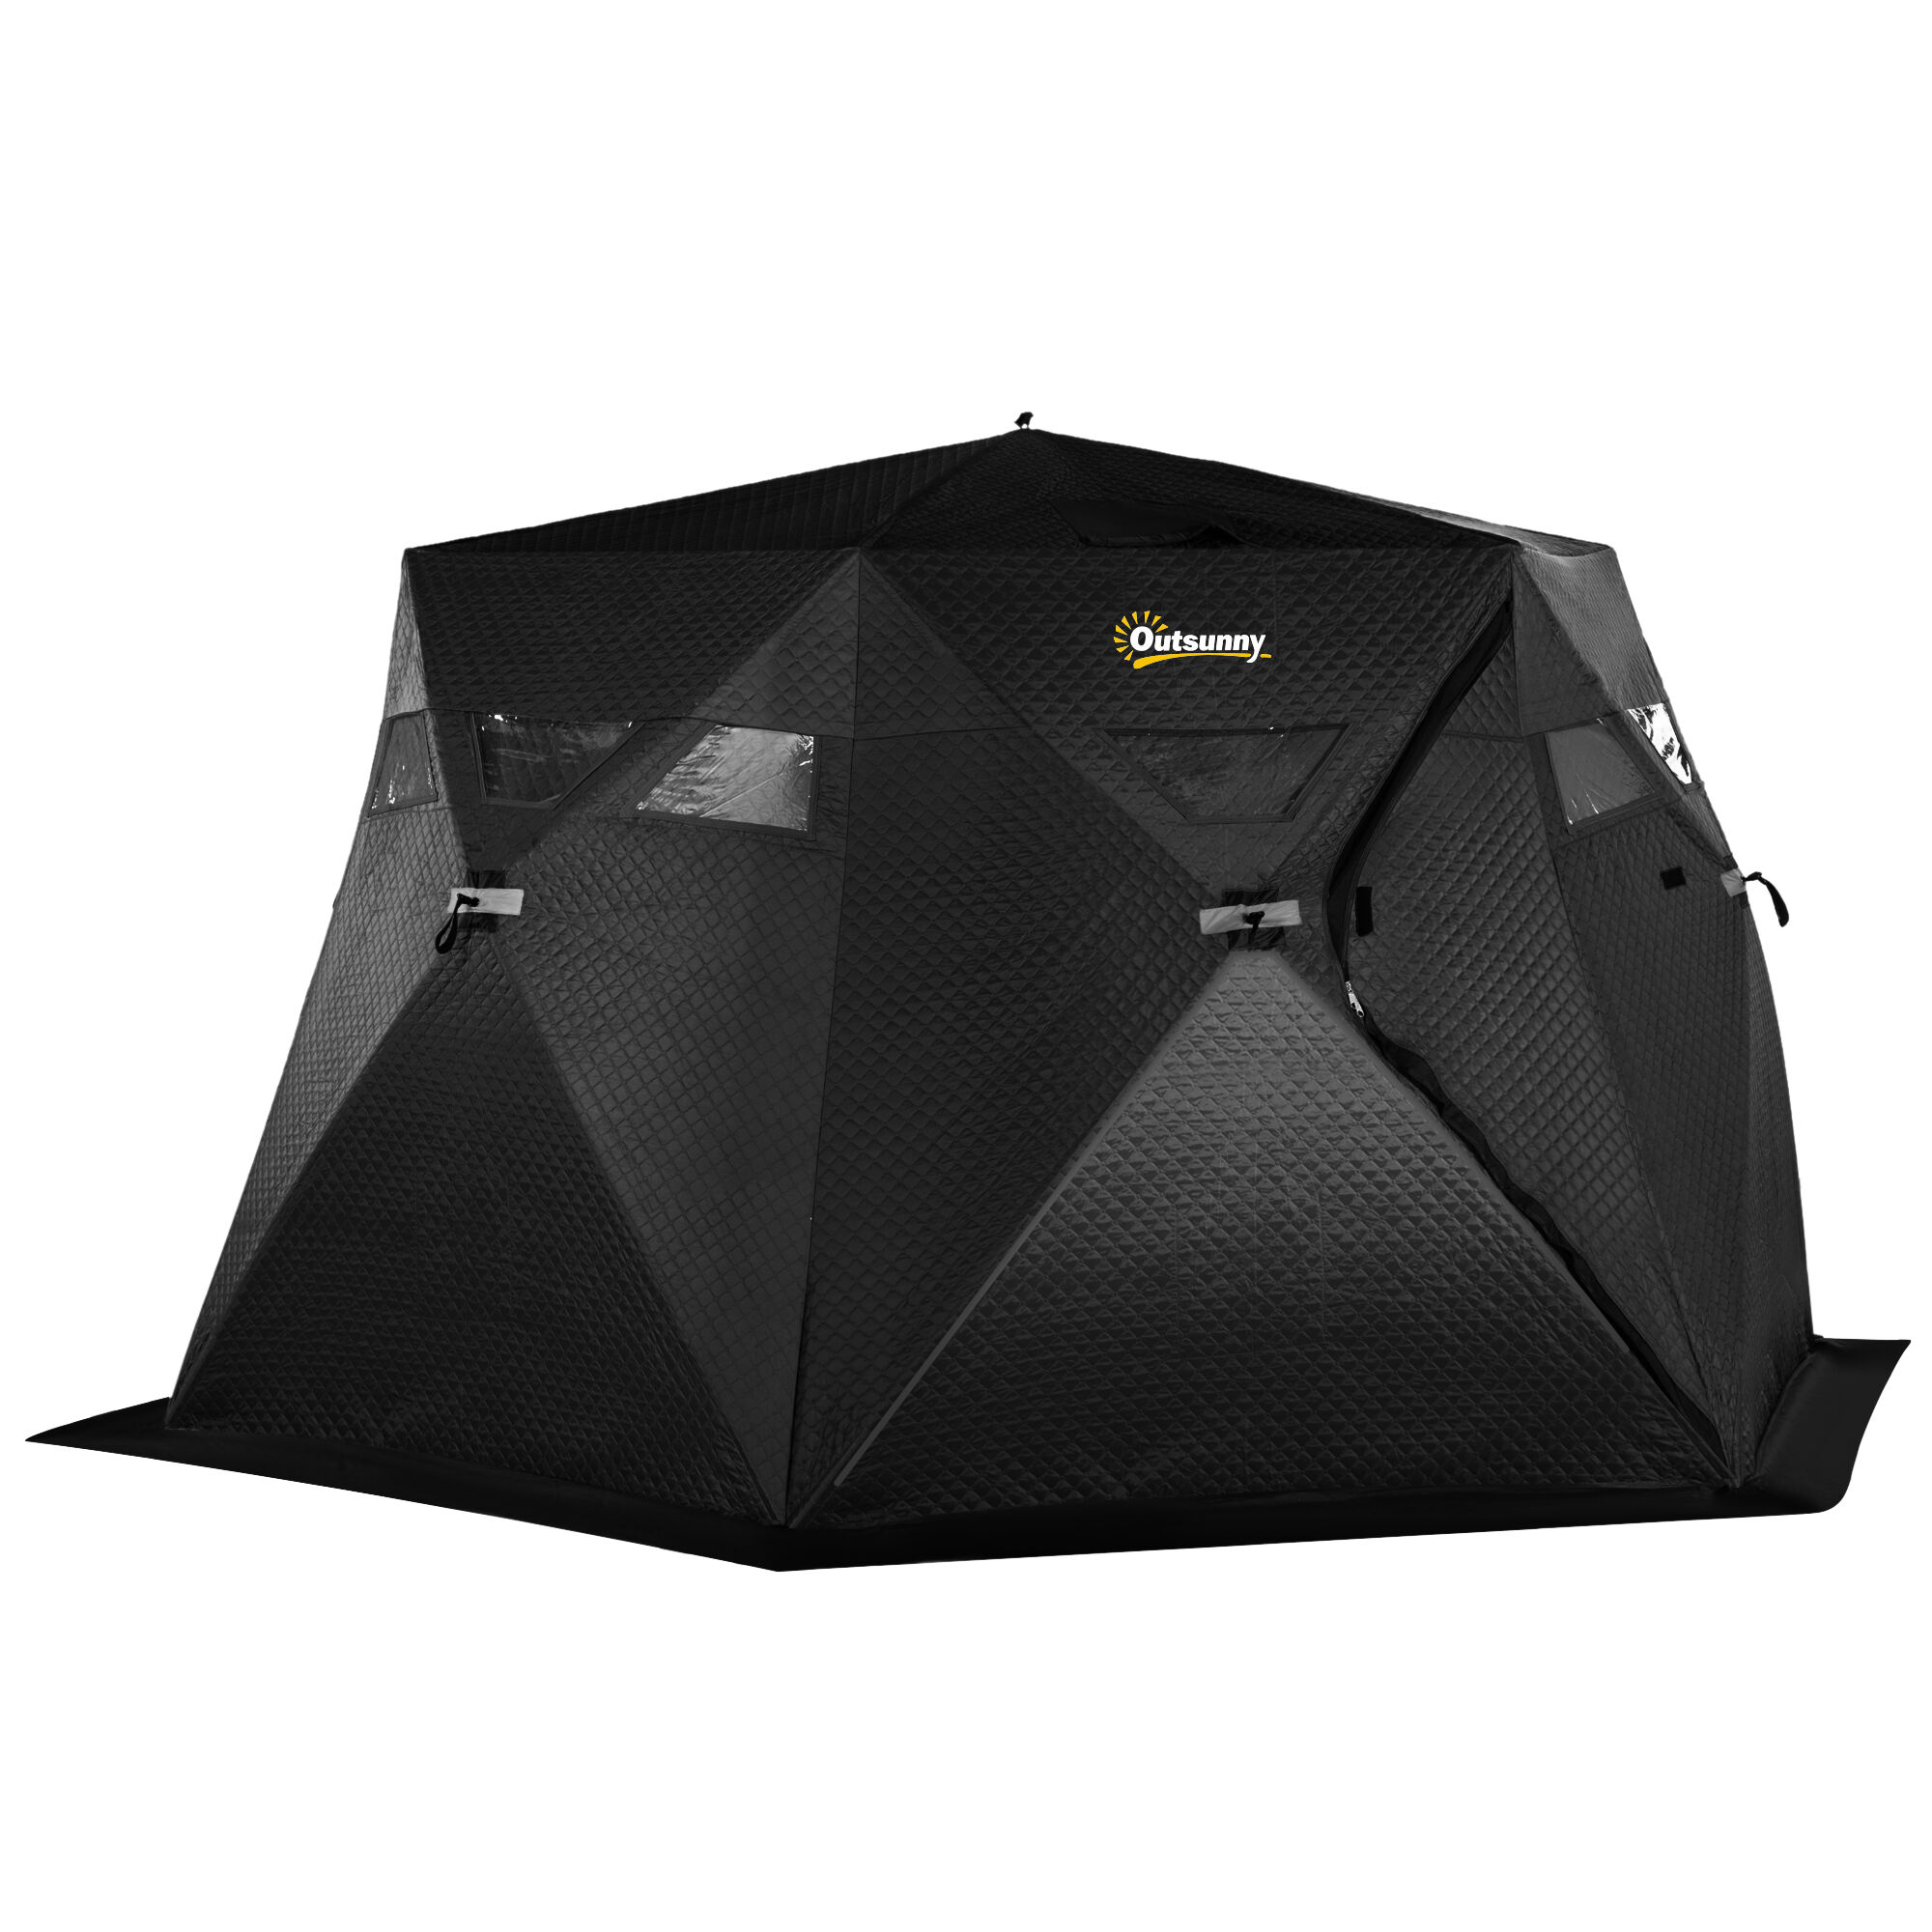 Outsunny 4 Person Insulated Ice Fishing Shelter Black Pop-Up Portable Tent with Carry Bag Two Doors and Anchors for Extreme Cold -22閳?  Aosom.com